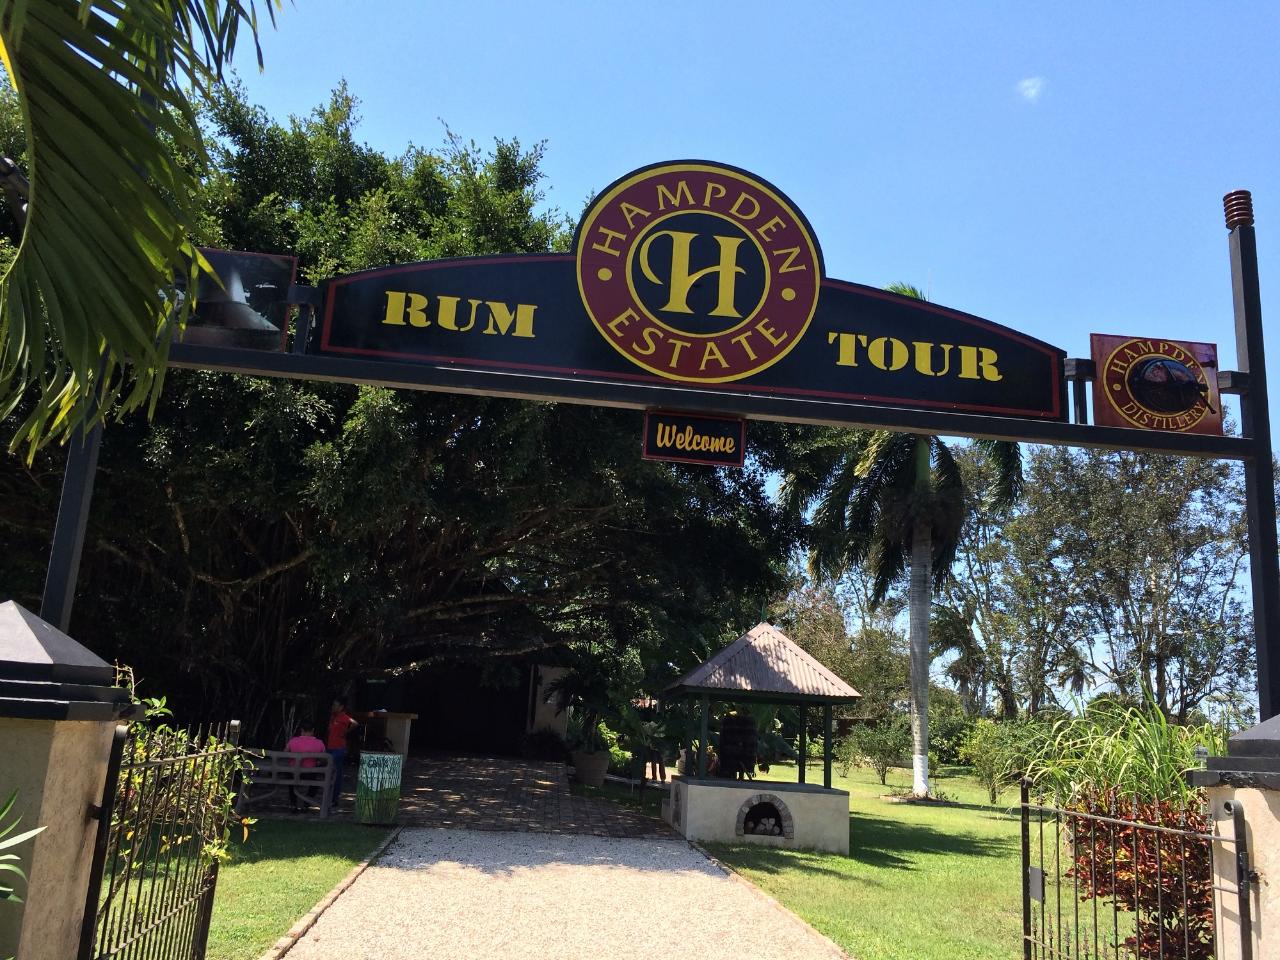 Hampden Estate Rum Tour and Lunch from Ocho Rios